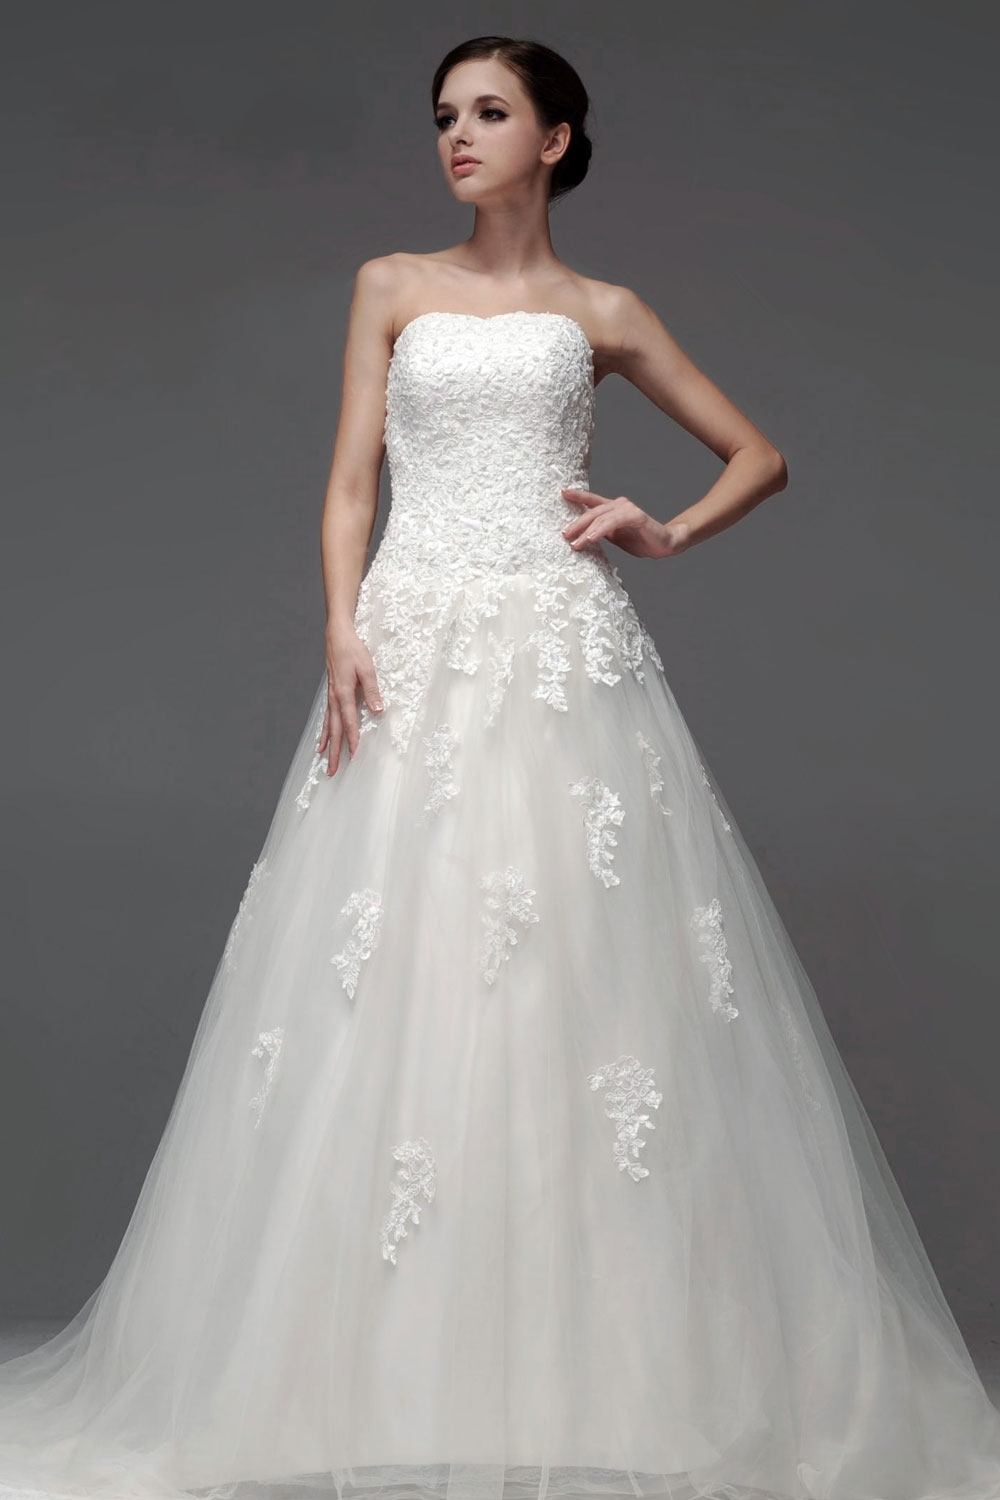 vintage-wedding-dresses-inspired-bridal-gowns-new-style-tagged-with-wedding-dressed